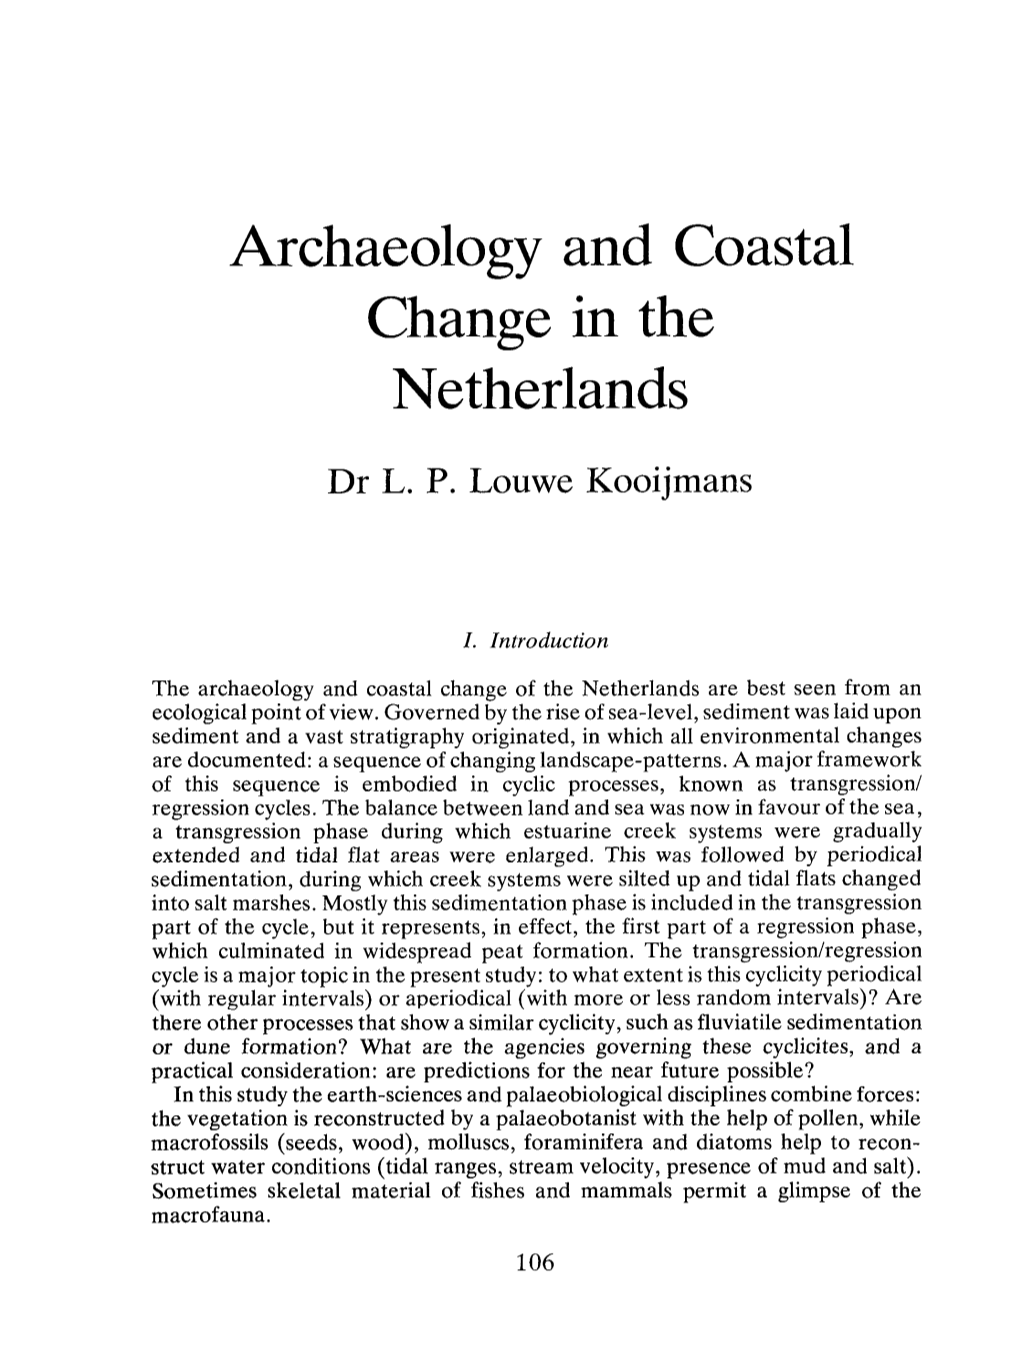 Archaeology and Coastal Change in the Netherlands